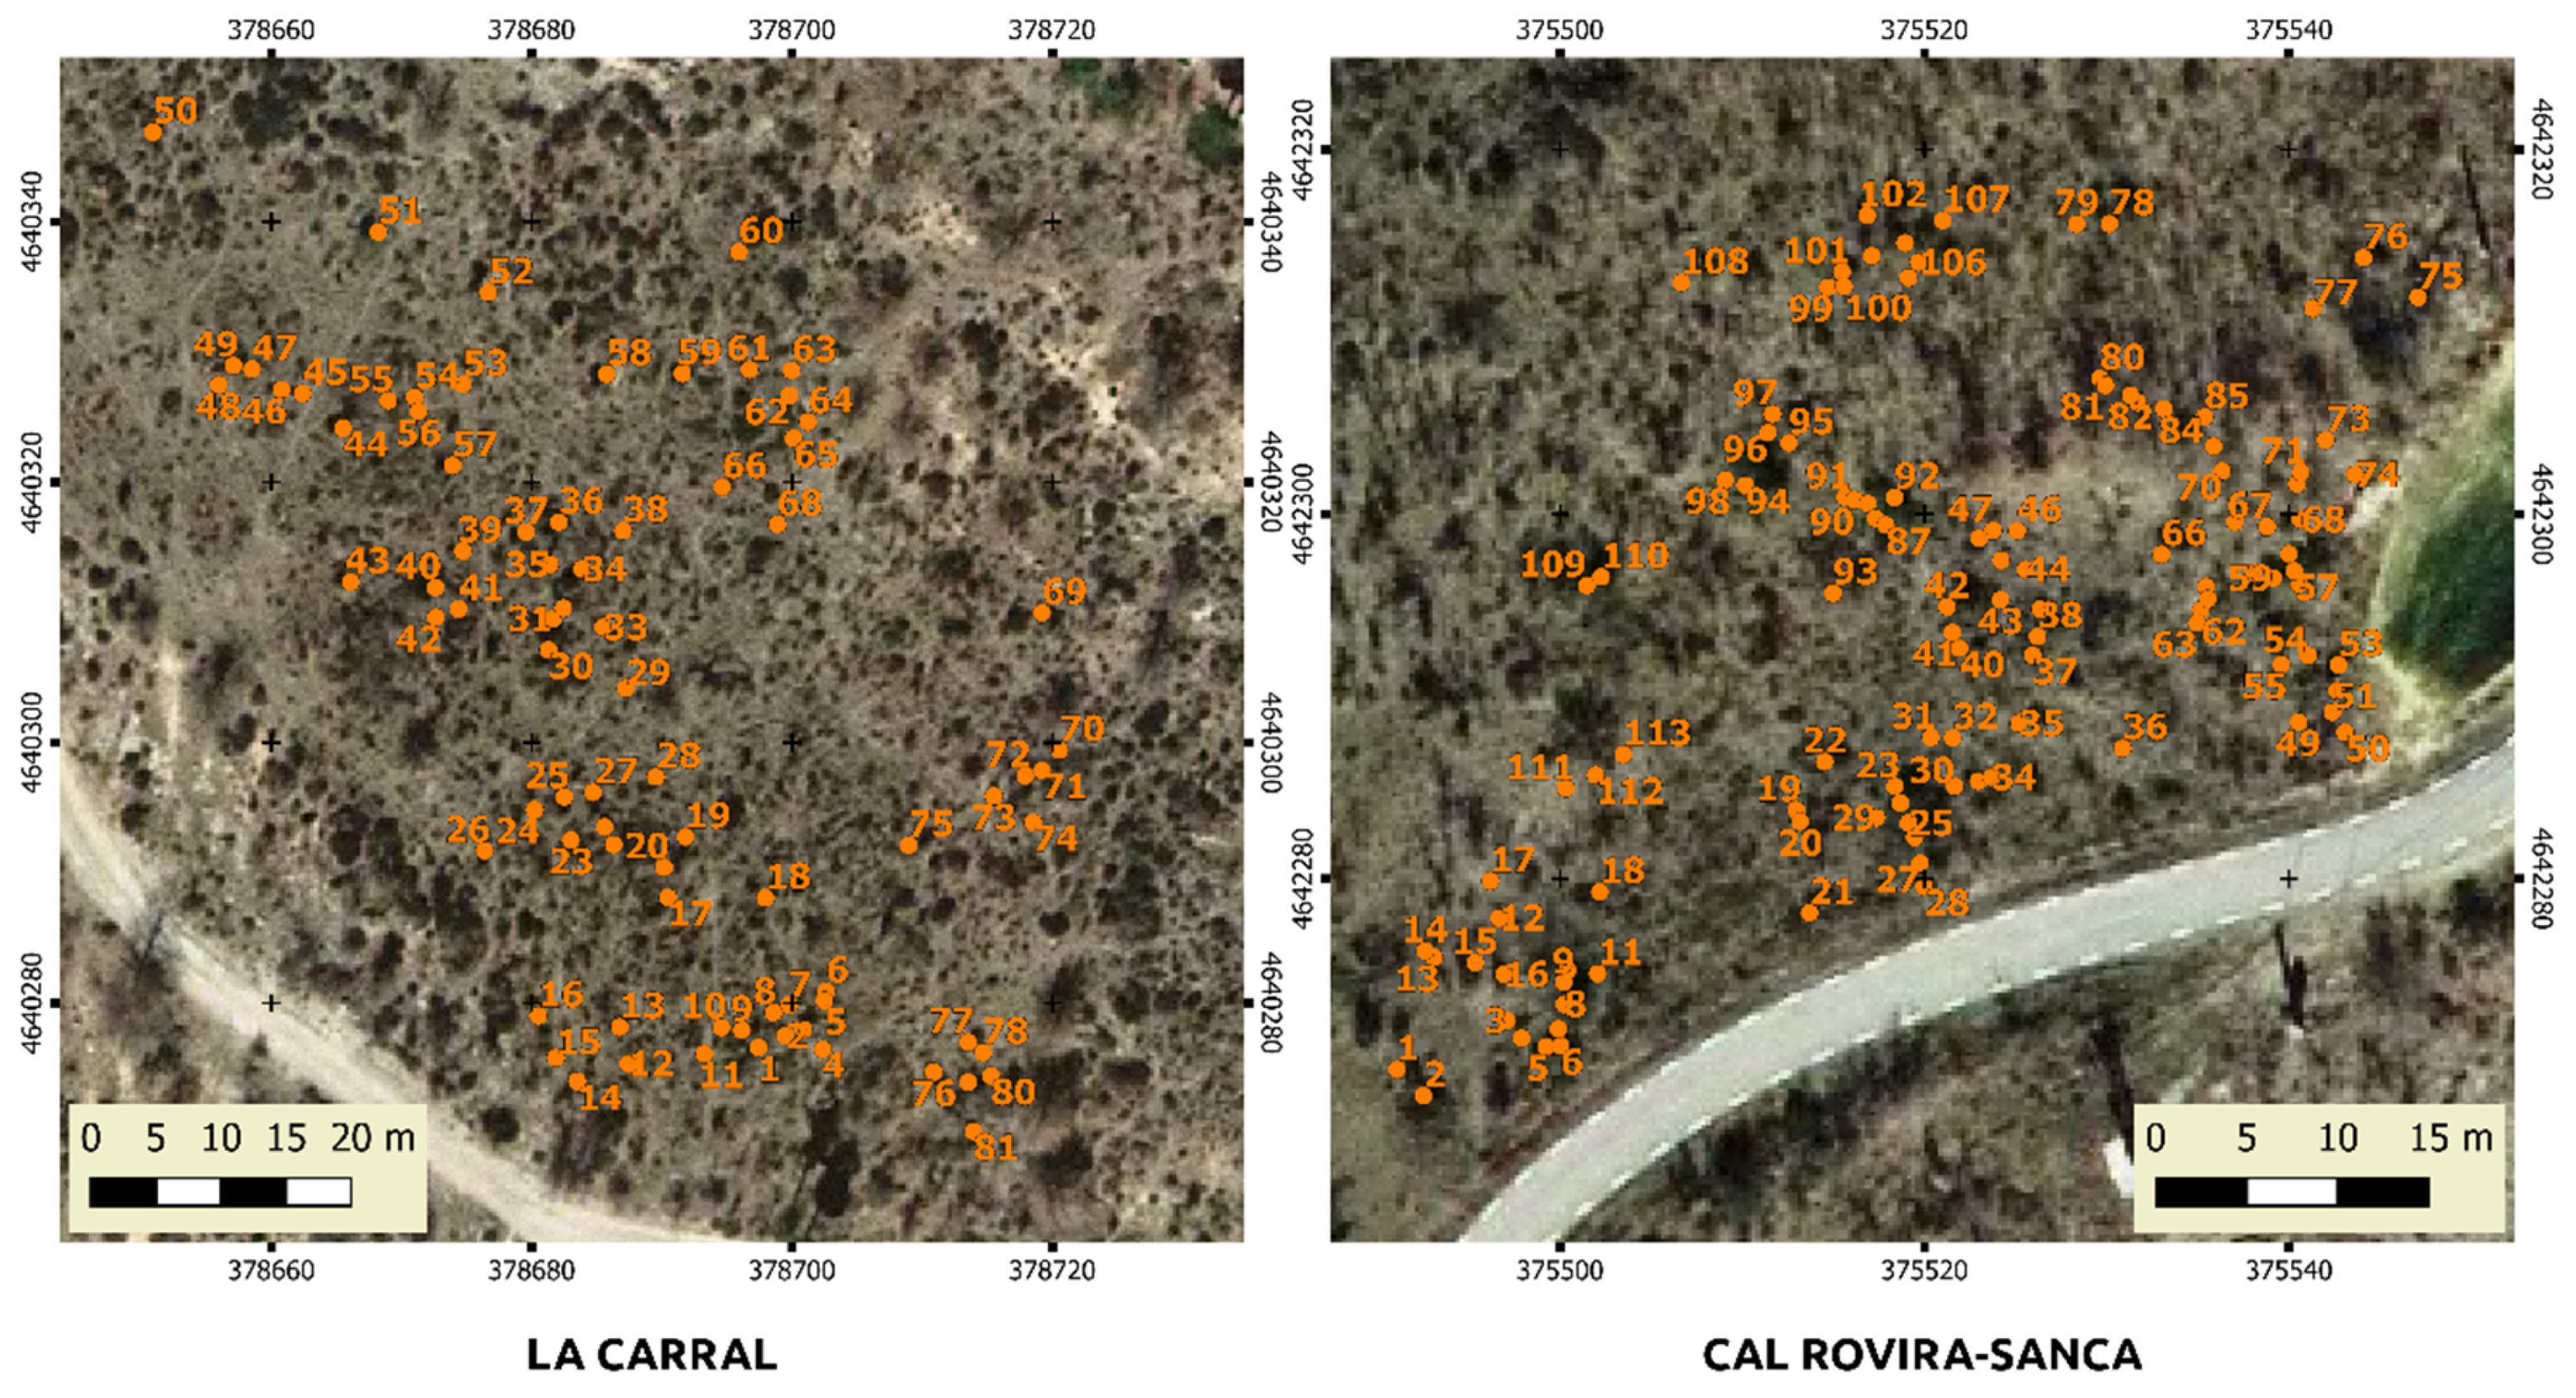 Aerial ortophotographs of both sites, with overlapped positions of all the pines found in the sampling areas.